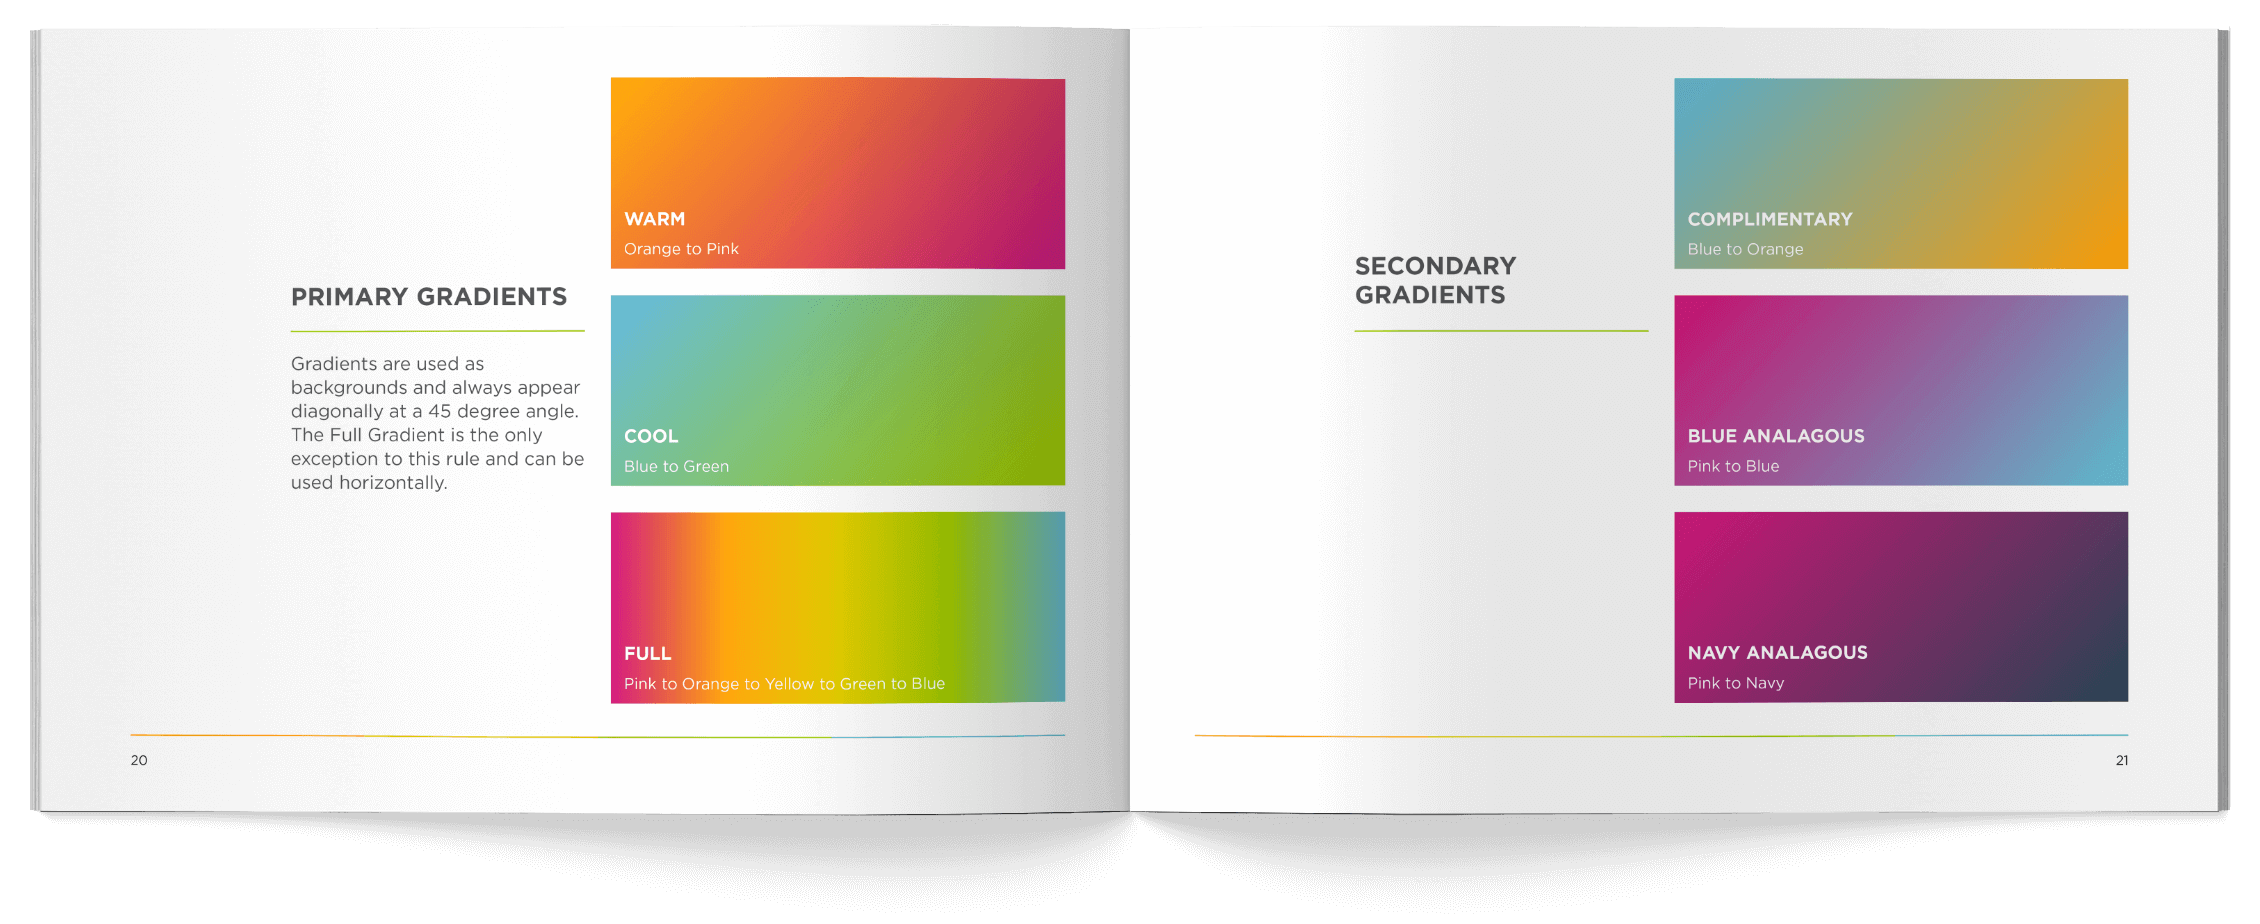 Gradient pages of the Pretty Instant brand book